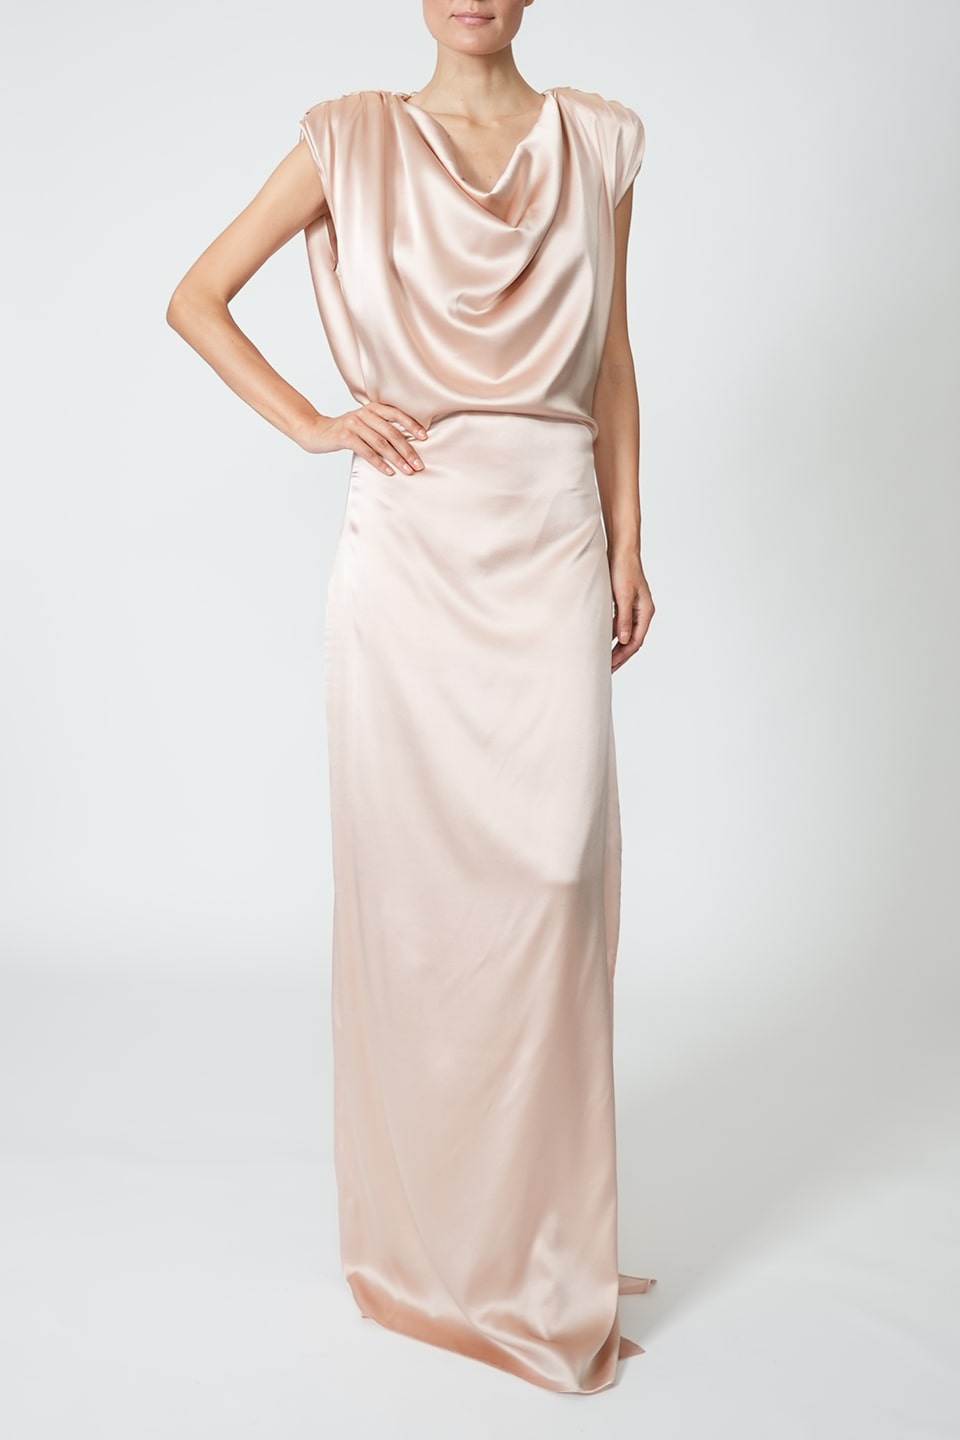 Blush dress for online shopping in Dubai. Special occasions dress from fashion designer